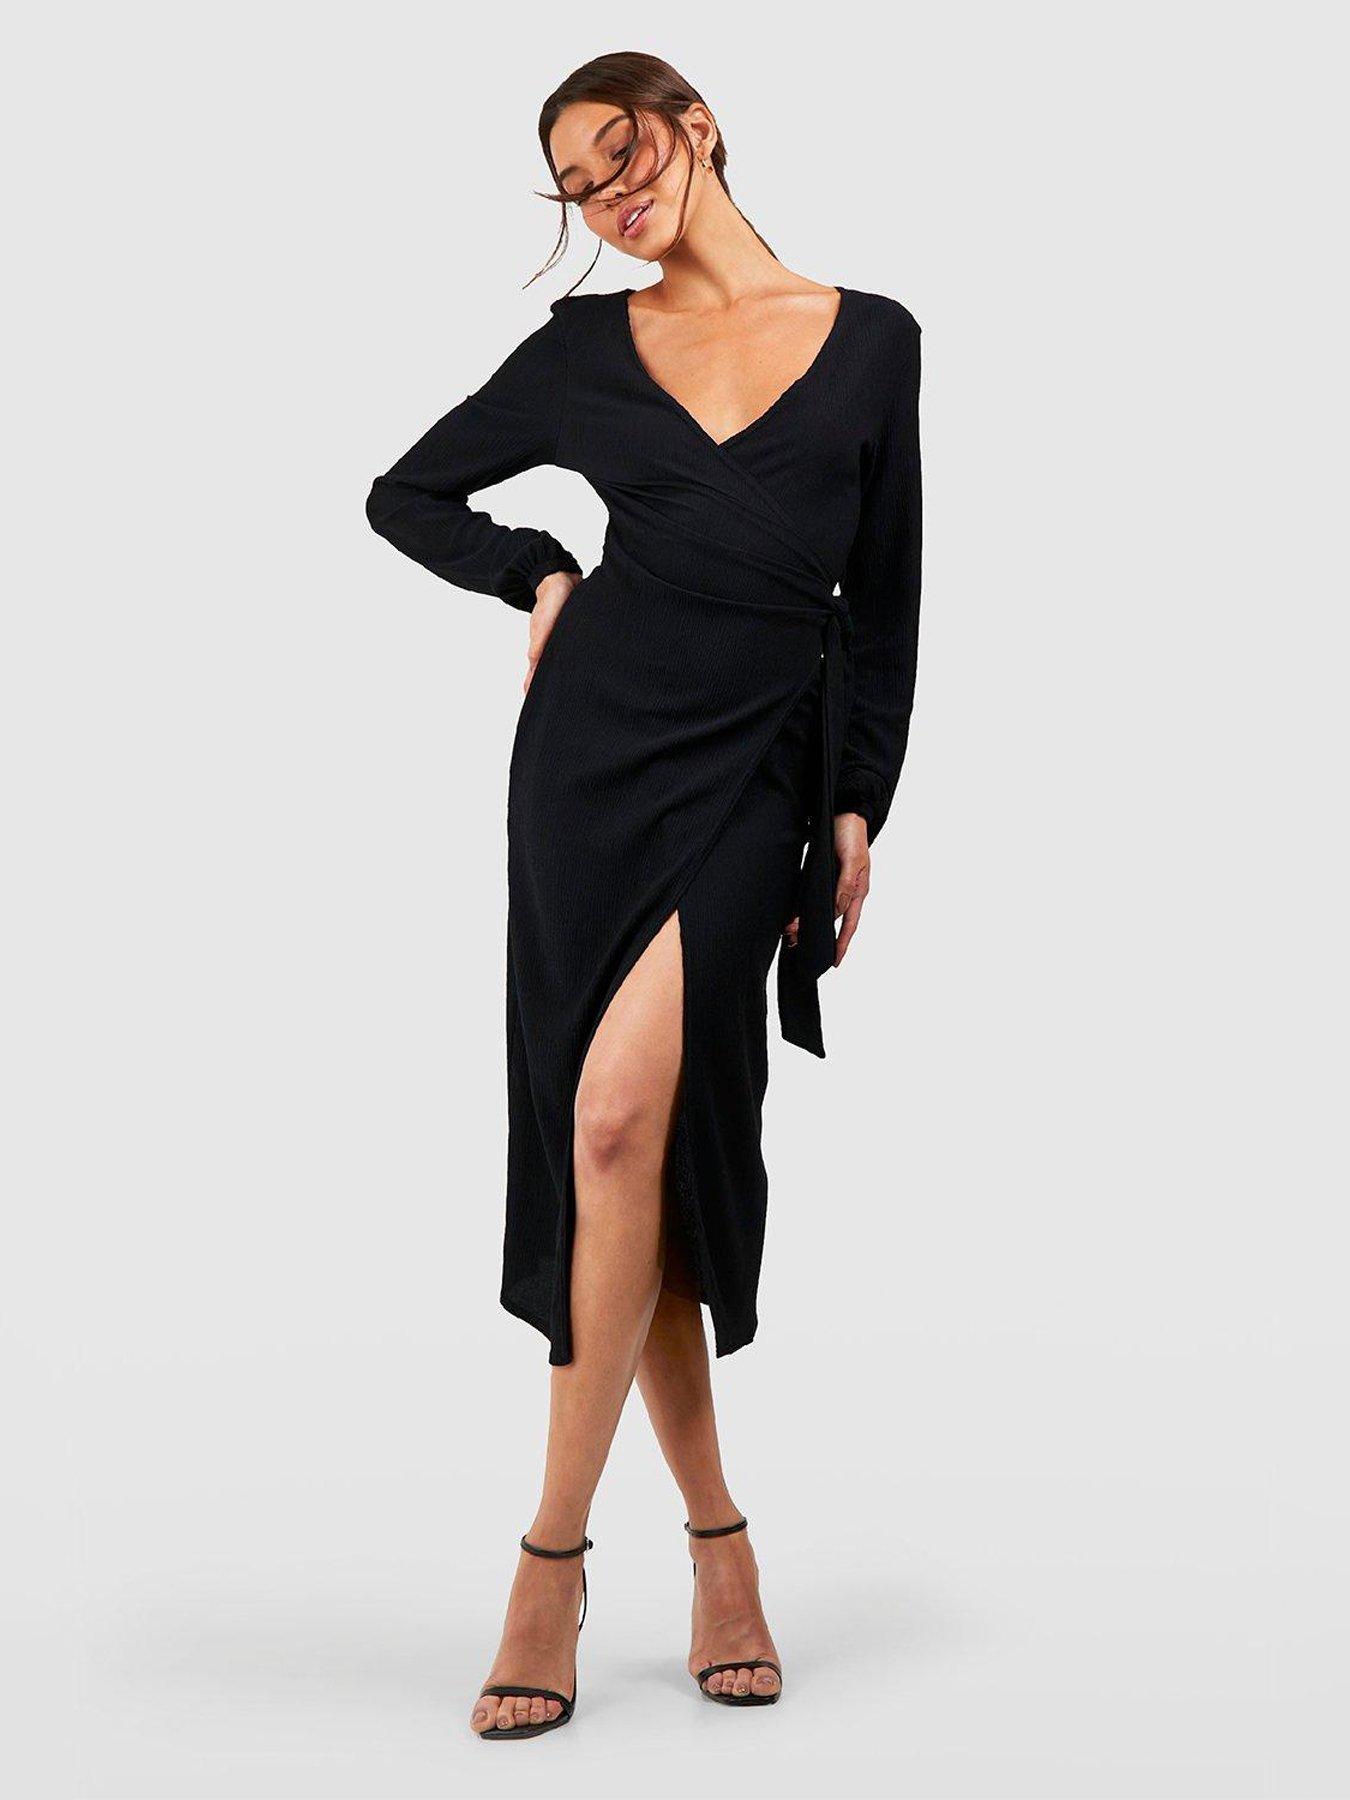 Buy Boohoo maternity knitted sweaters dress black Online